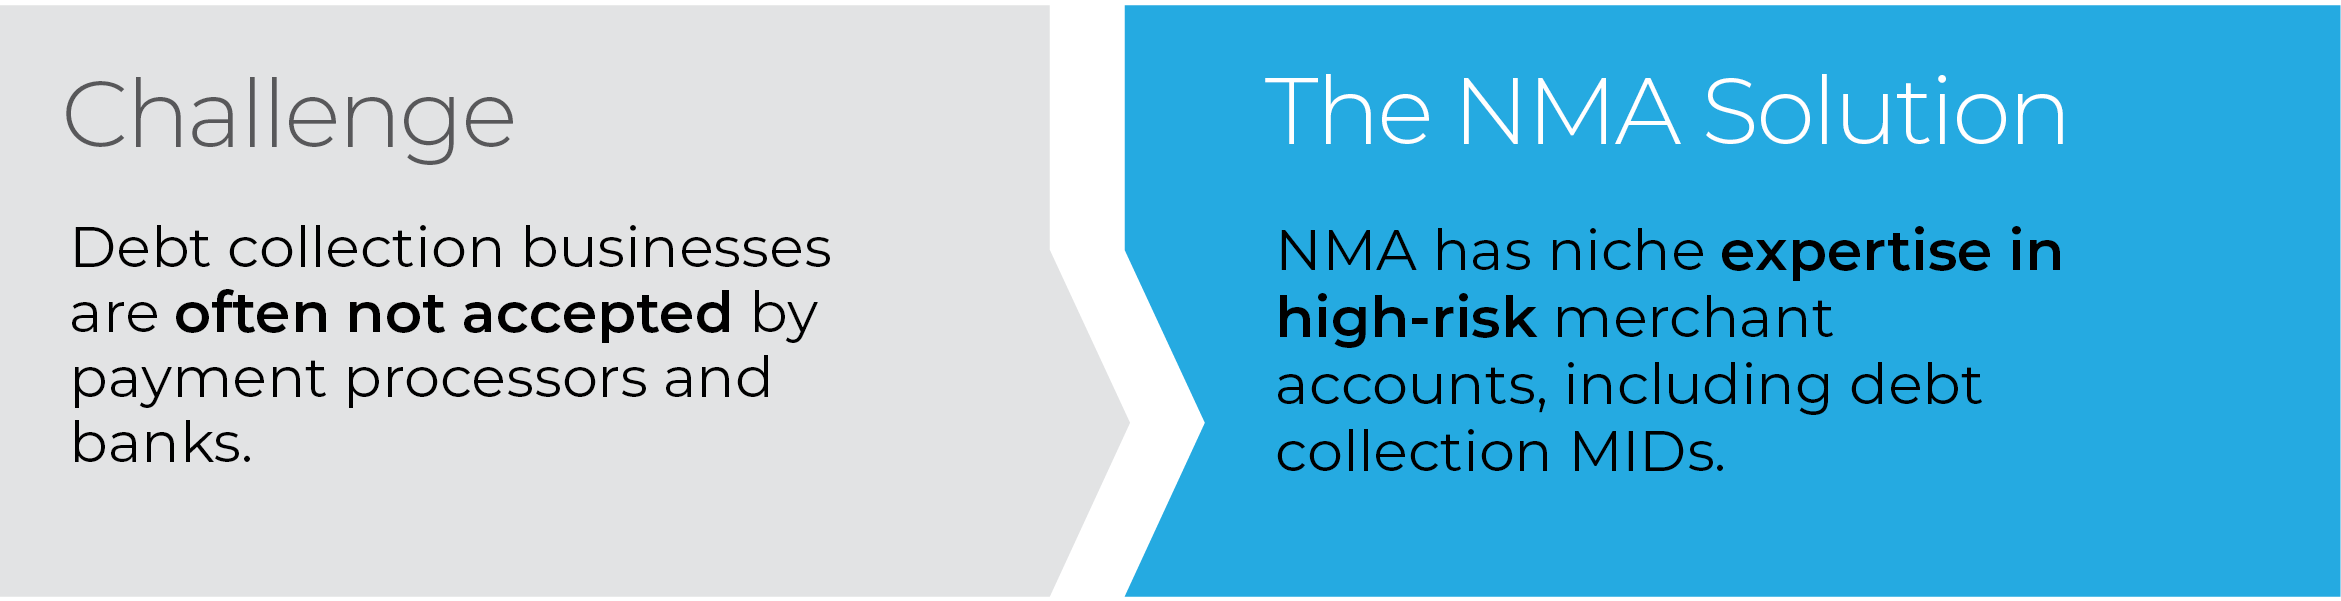 NMA has niche expertise in high-risk merchant accounts, including debt collection MIDs.